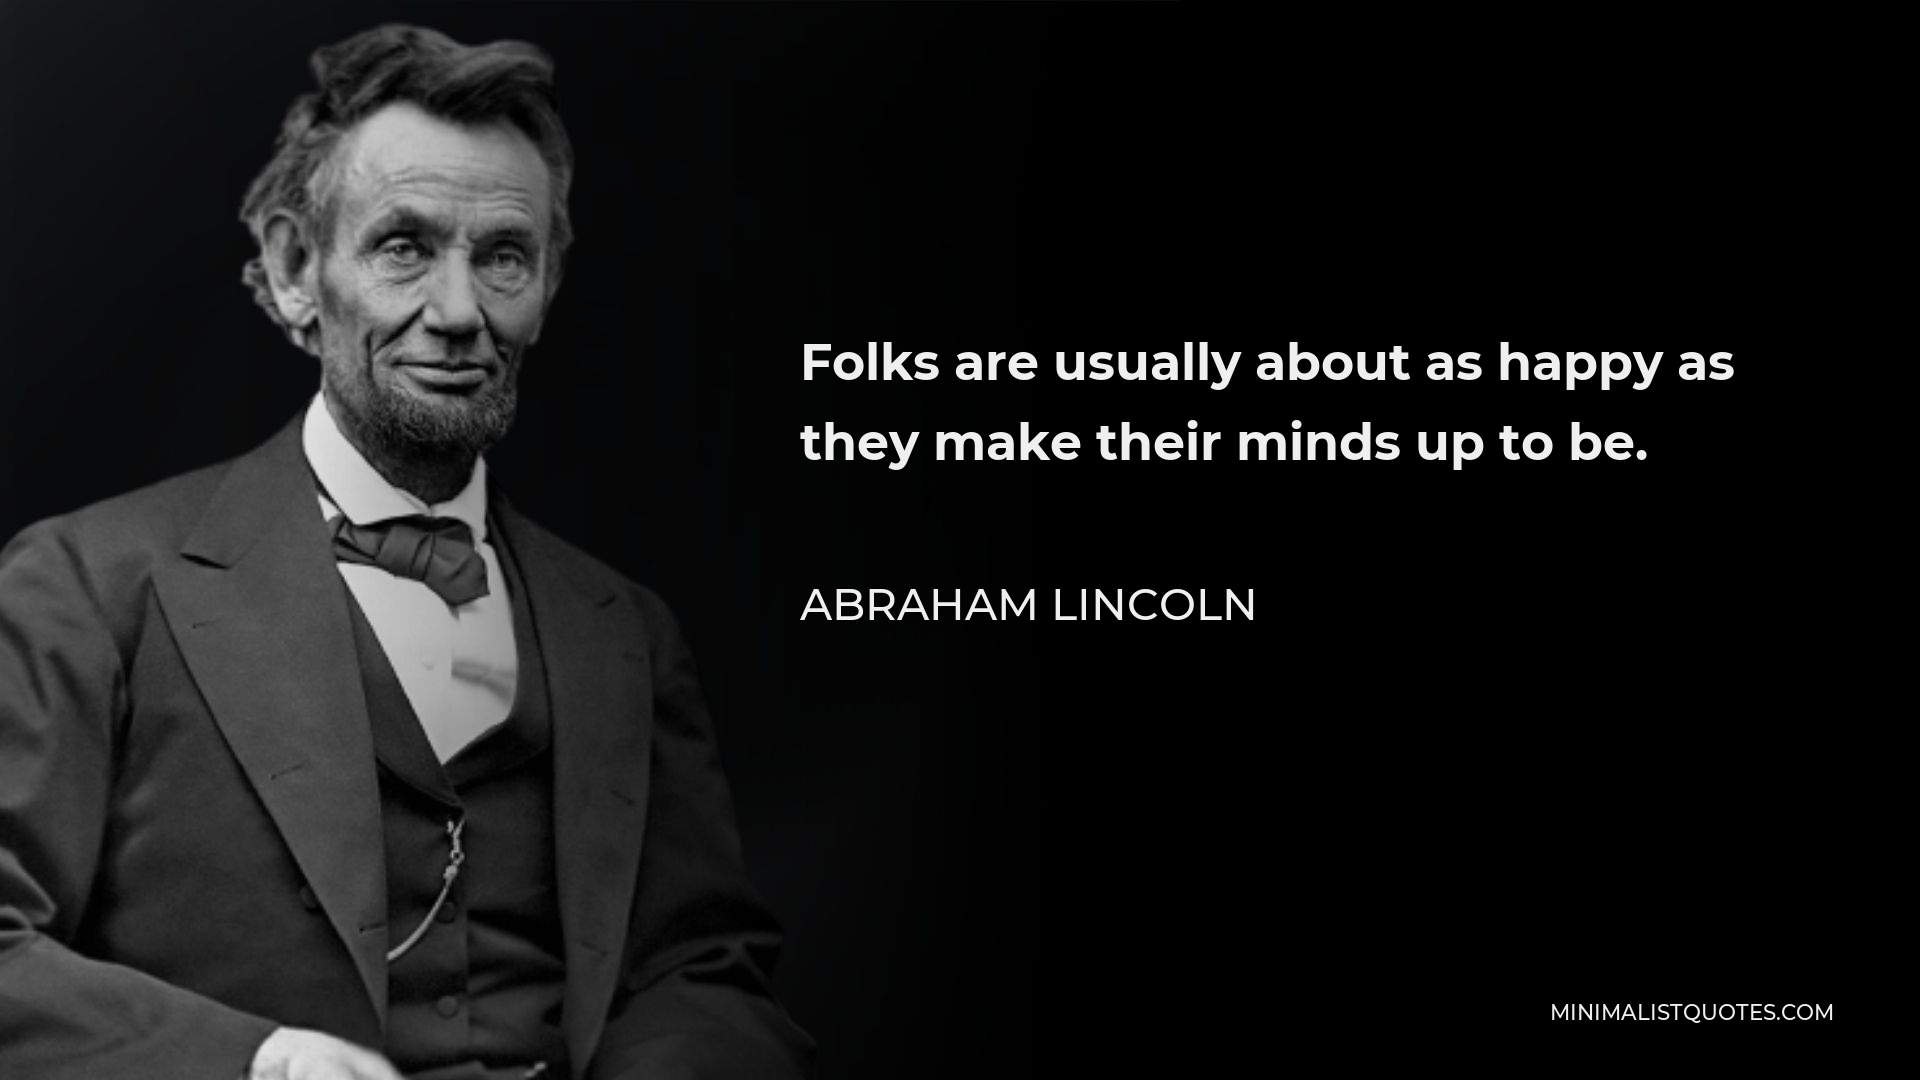 Abraham Lincoln Quote: Folks are usually about as happy as they make ...